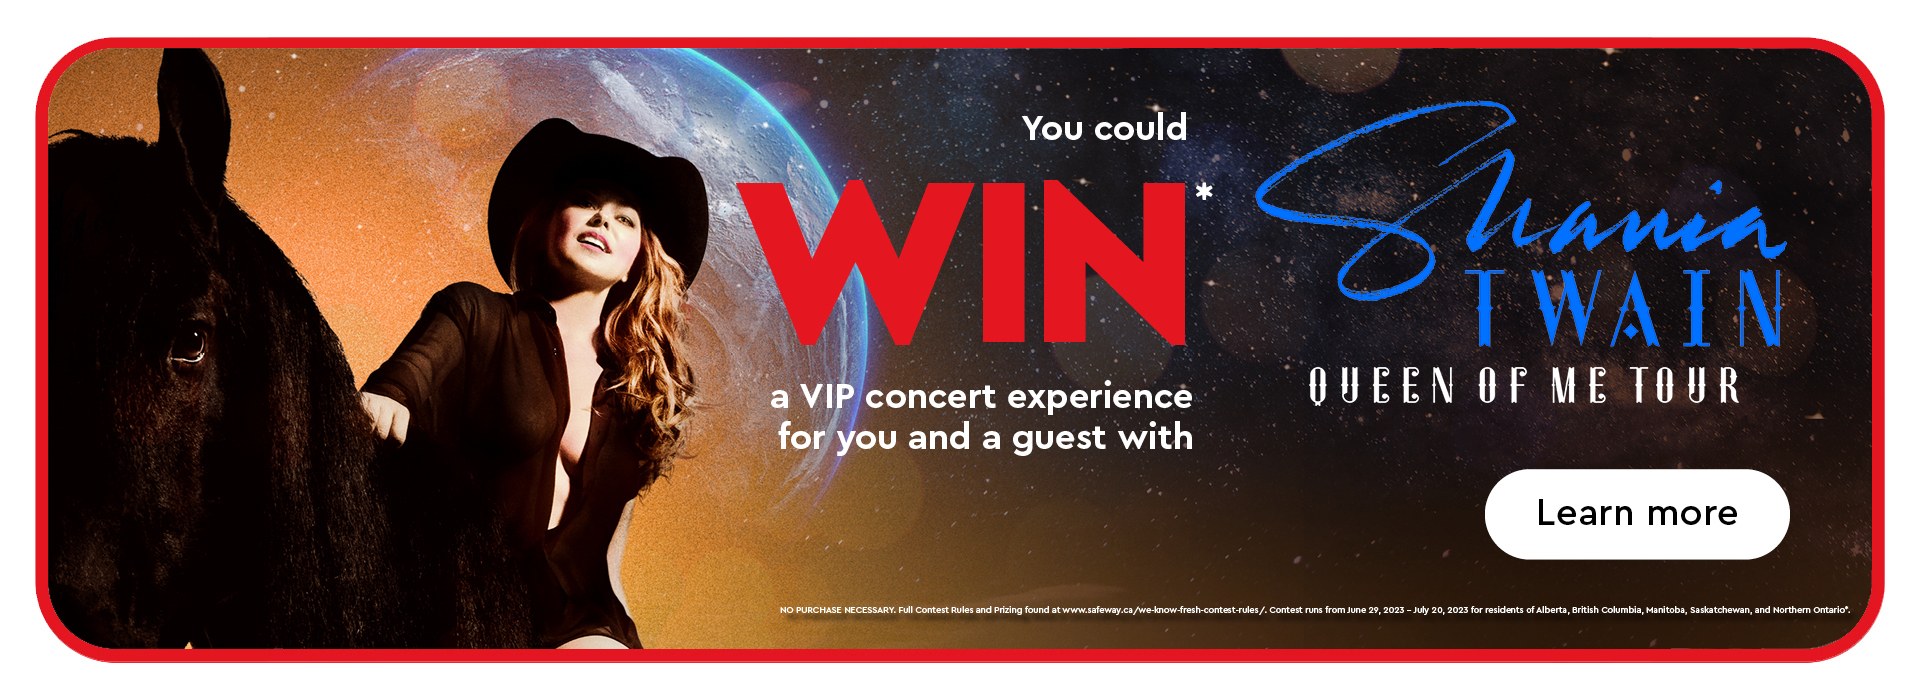 You could win* a vip concert experience for Shania tour